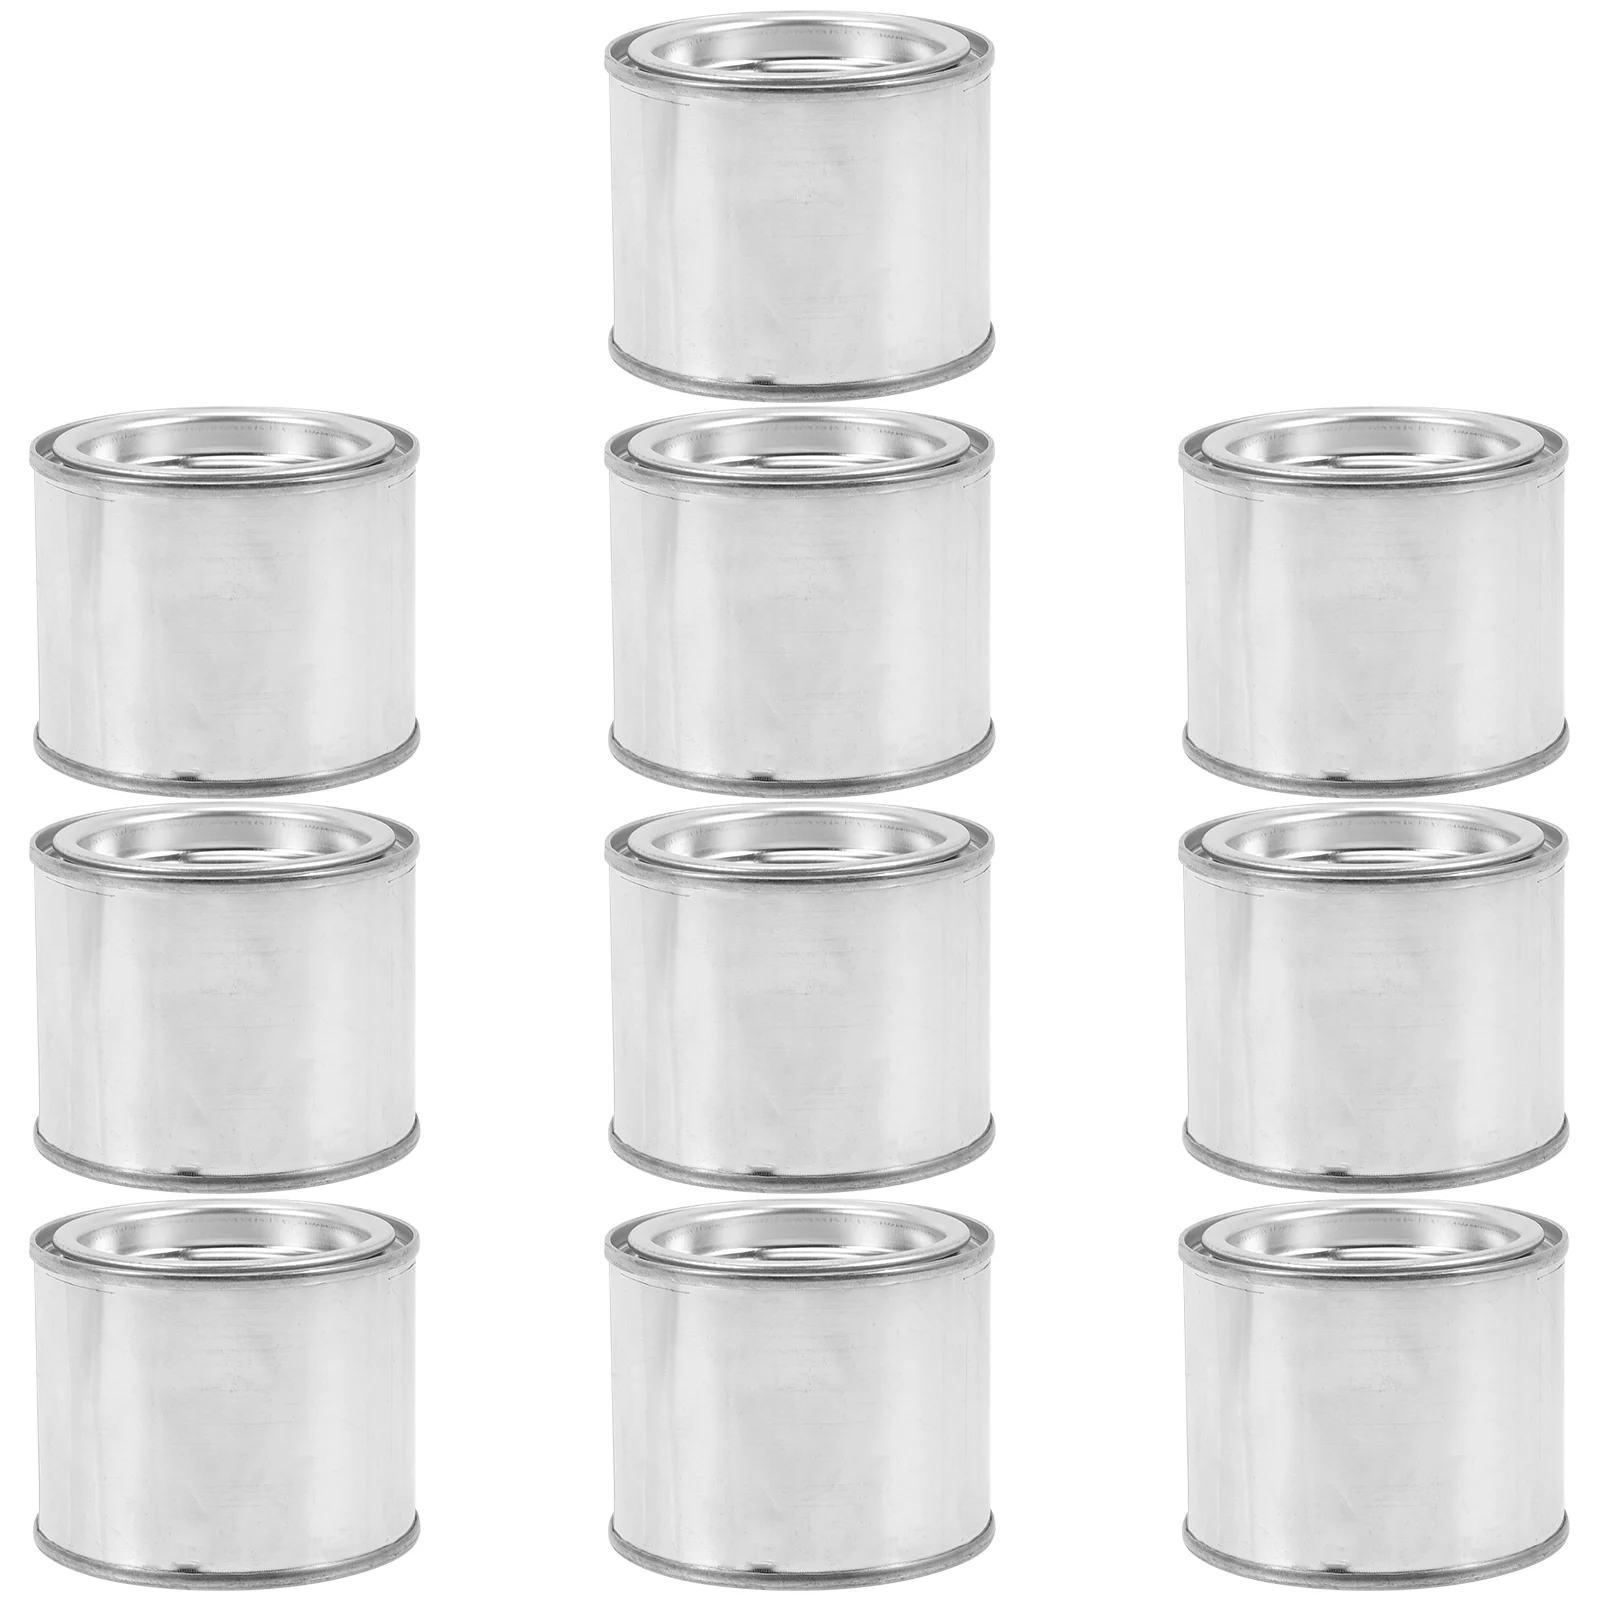 

10 Pcs Oil Paint Bucket Empty Cans with Lids Storage Containers for Leftover Pigment Sealing